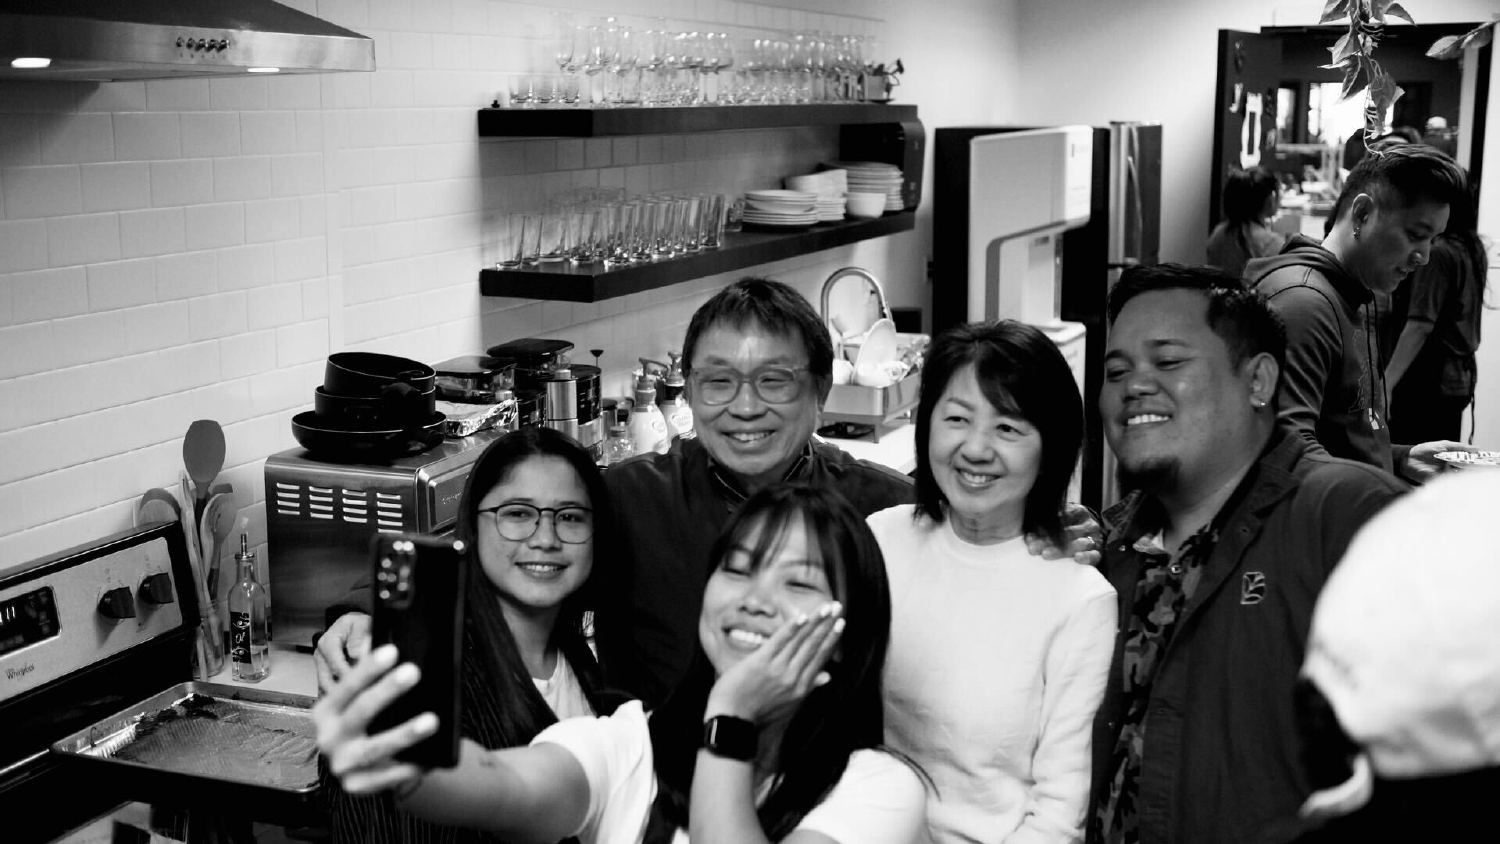 MDB Co. founders Daniel and Marianne Fong, posing for a selfie with office team members.